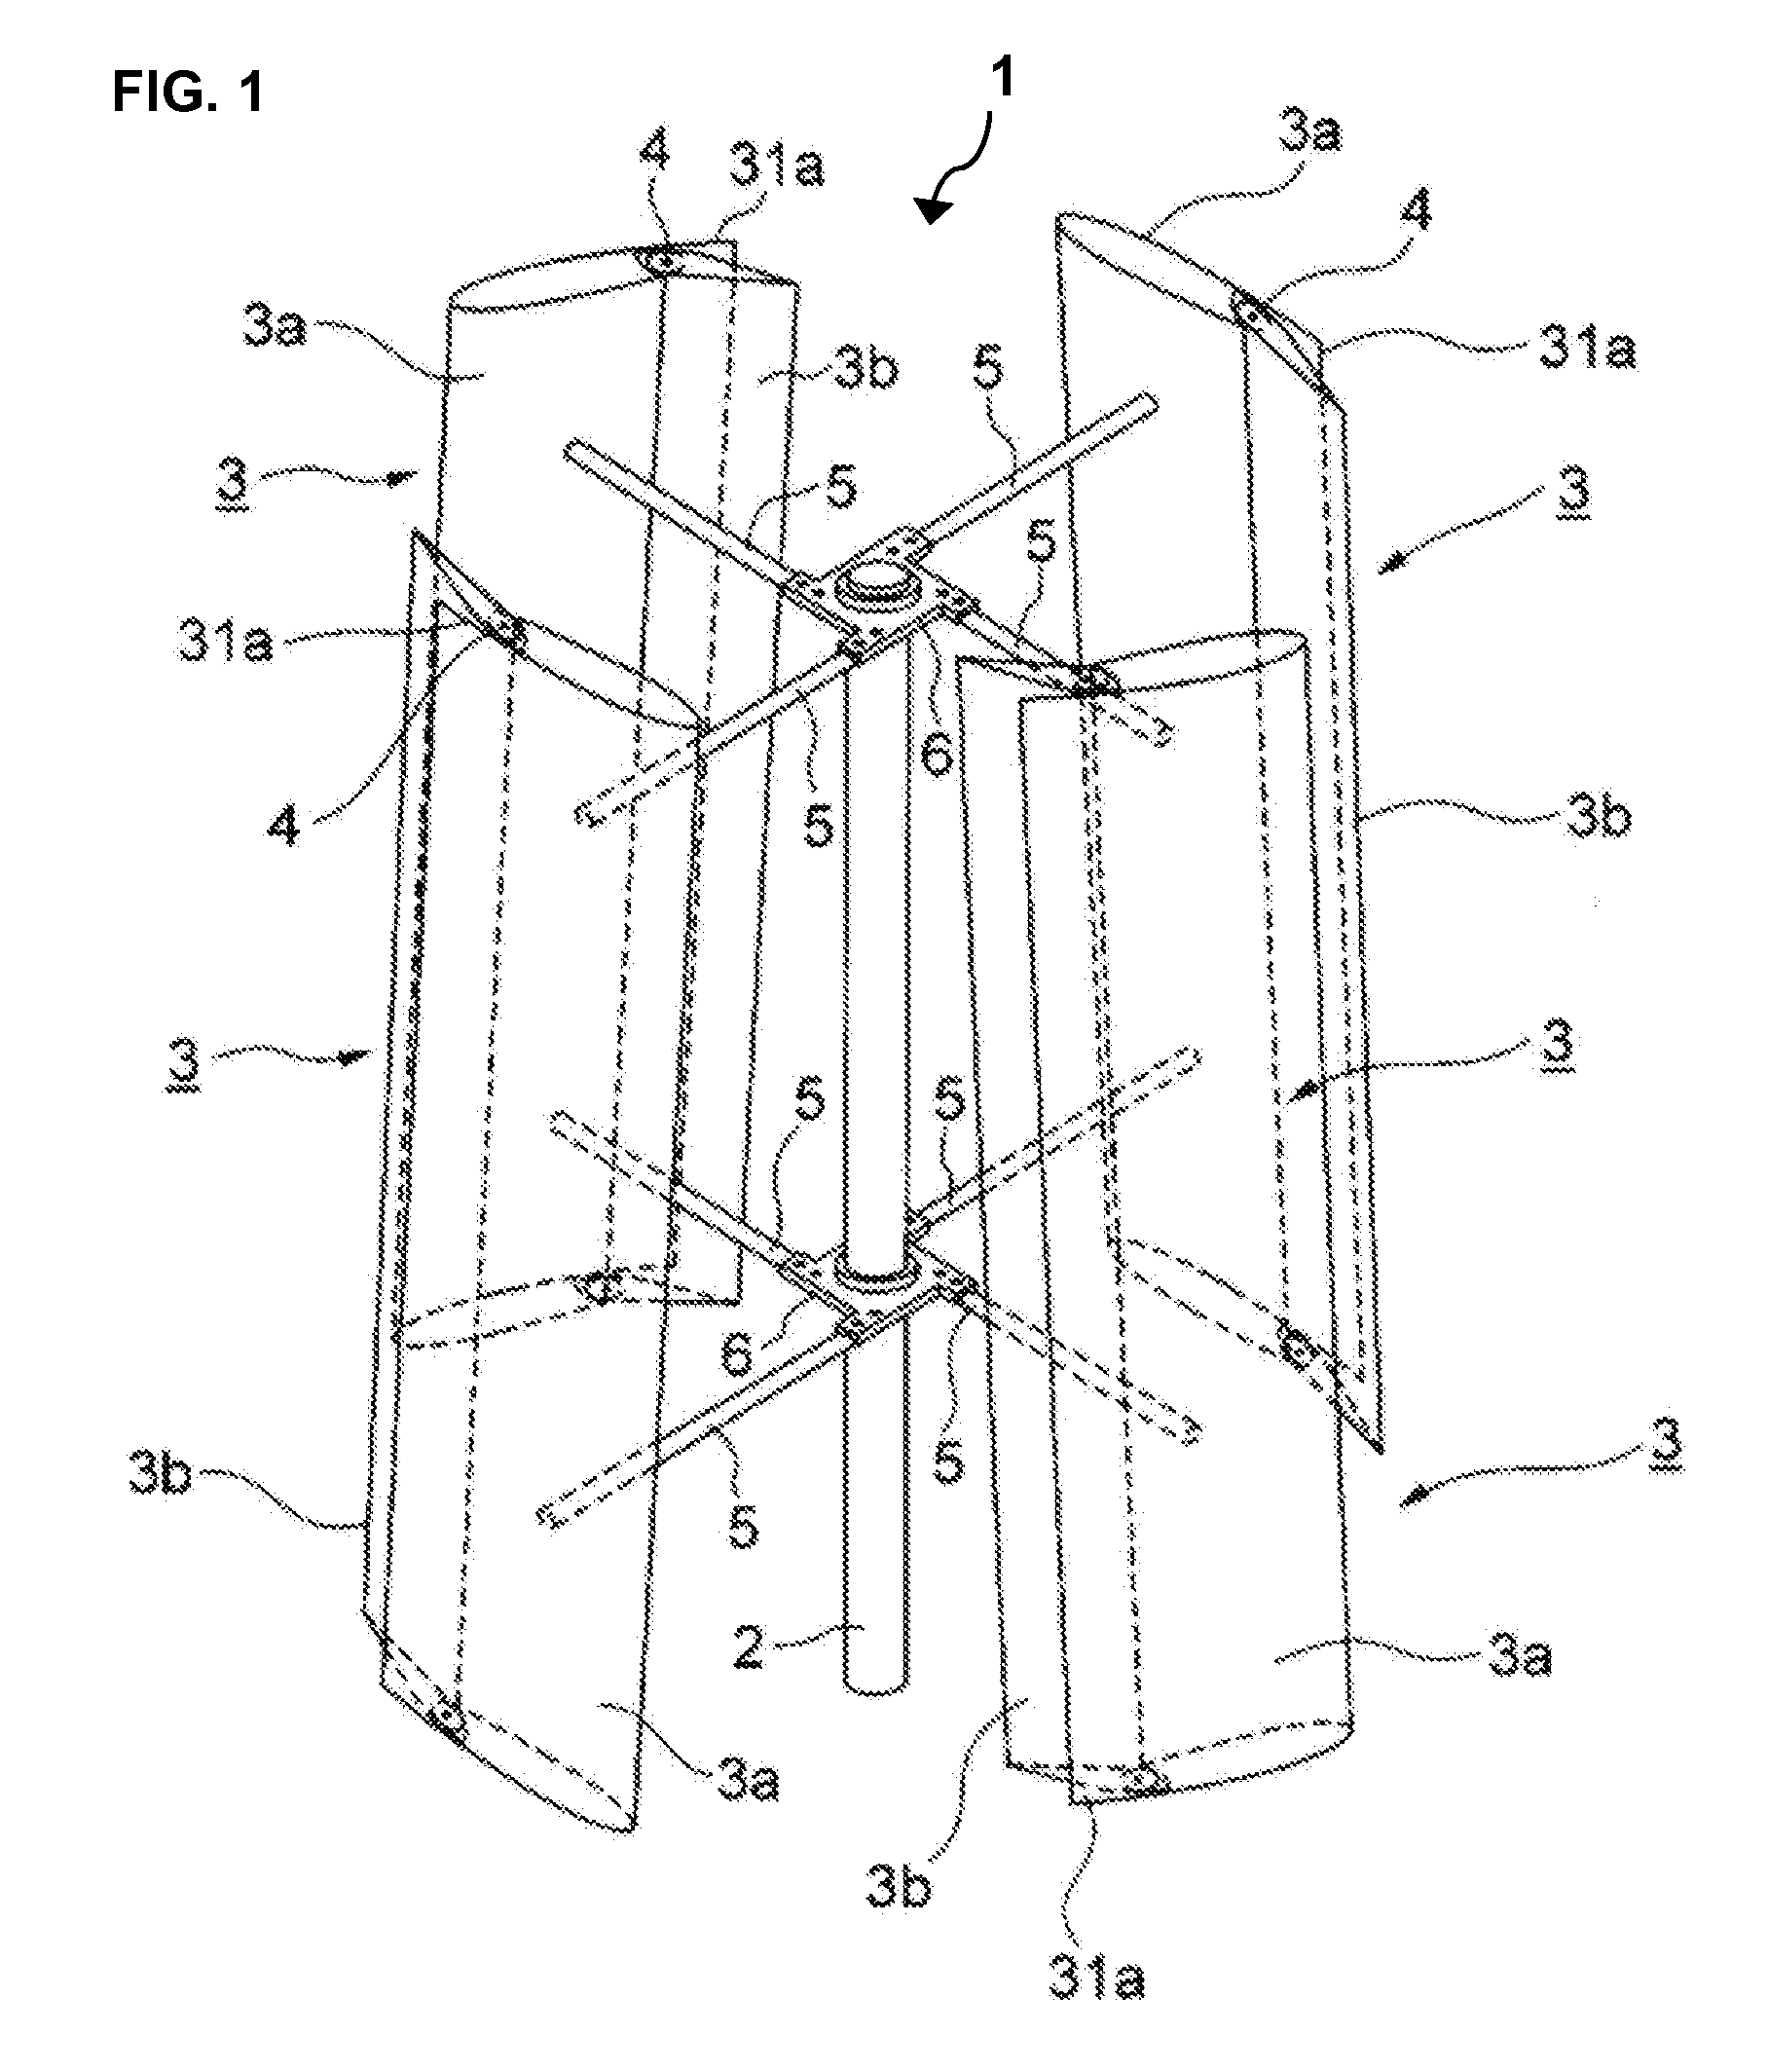 Vertical Axis Windmill And Wind Turbine System For Generating Electricity From Wind Energy